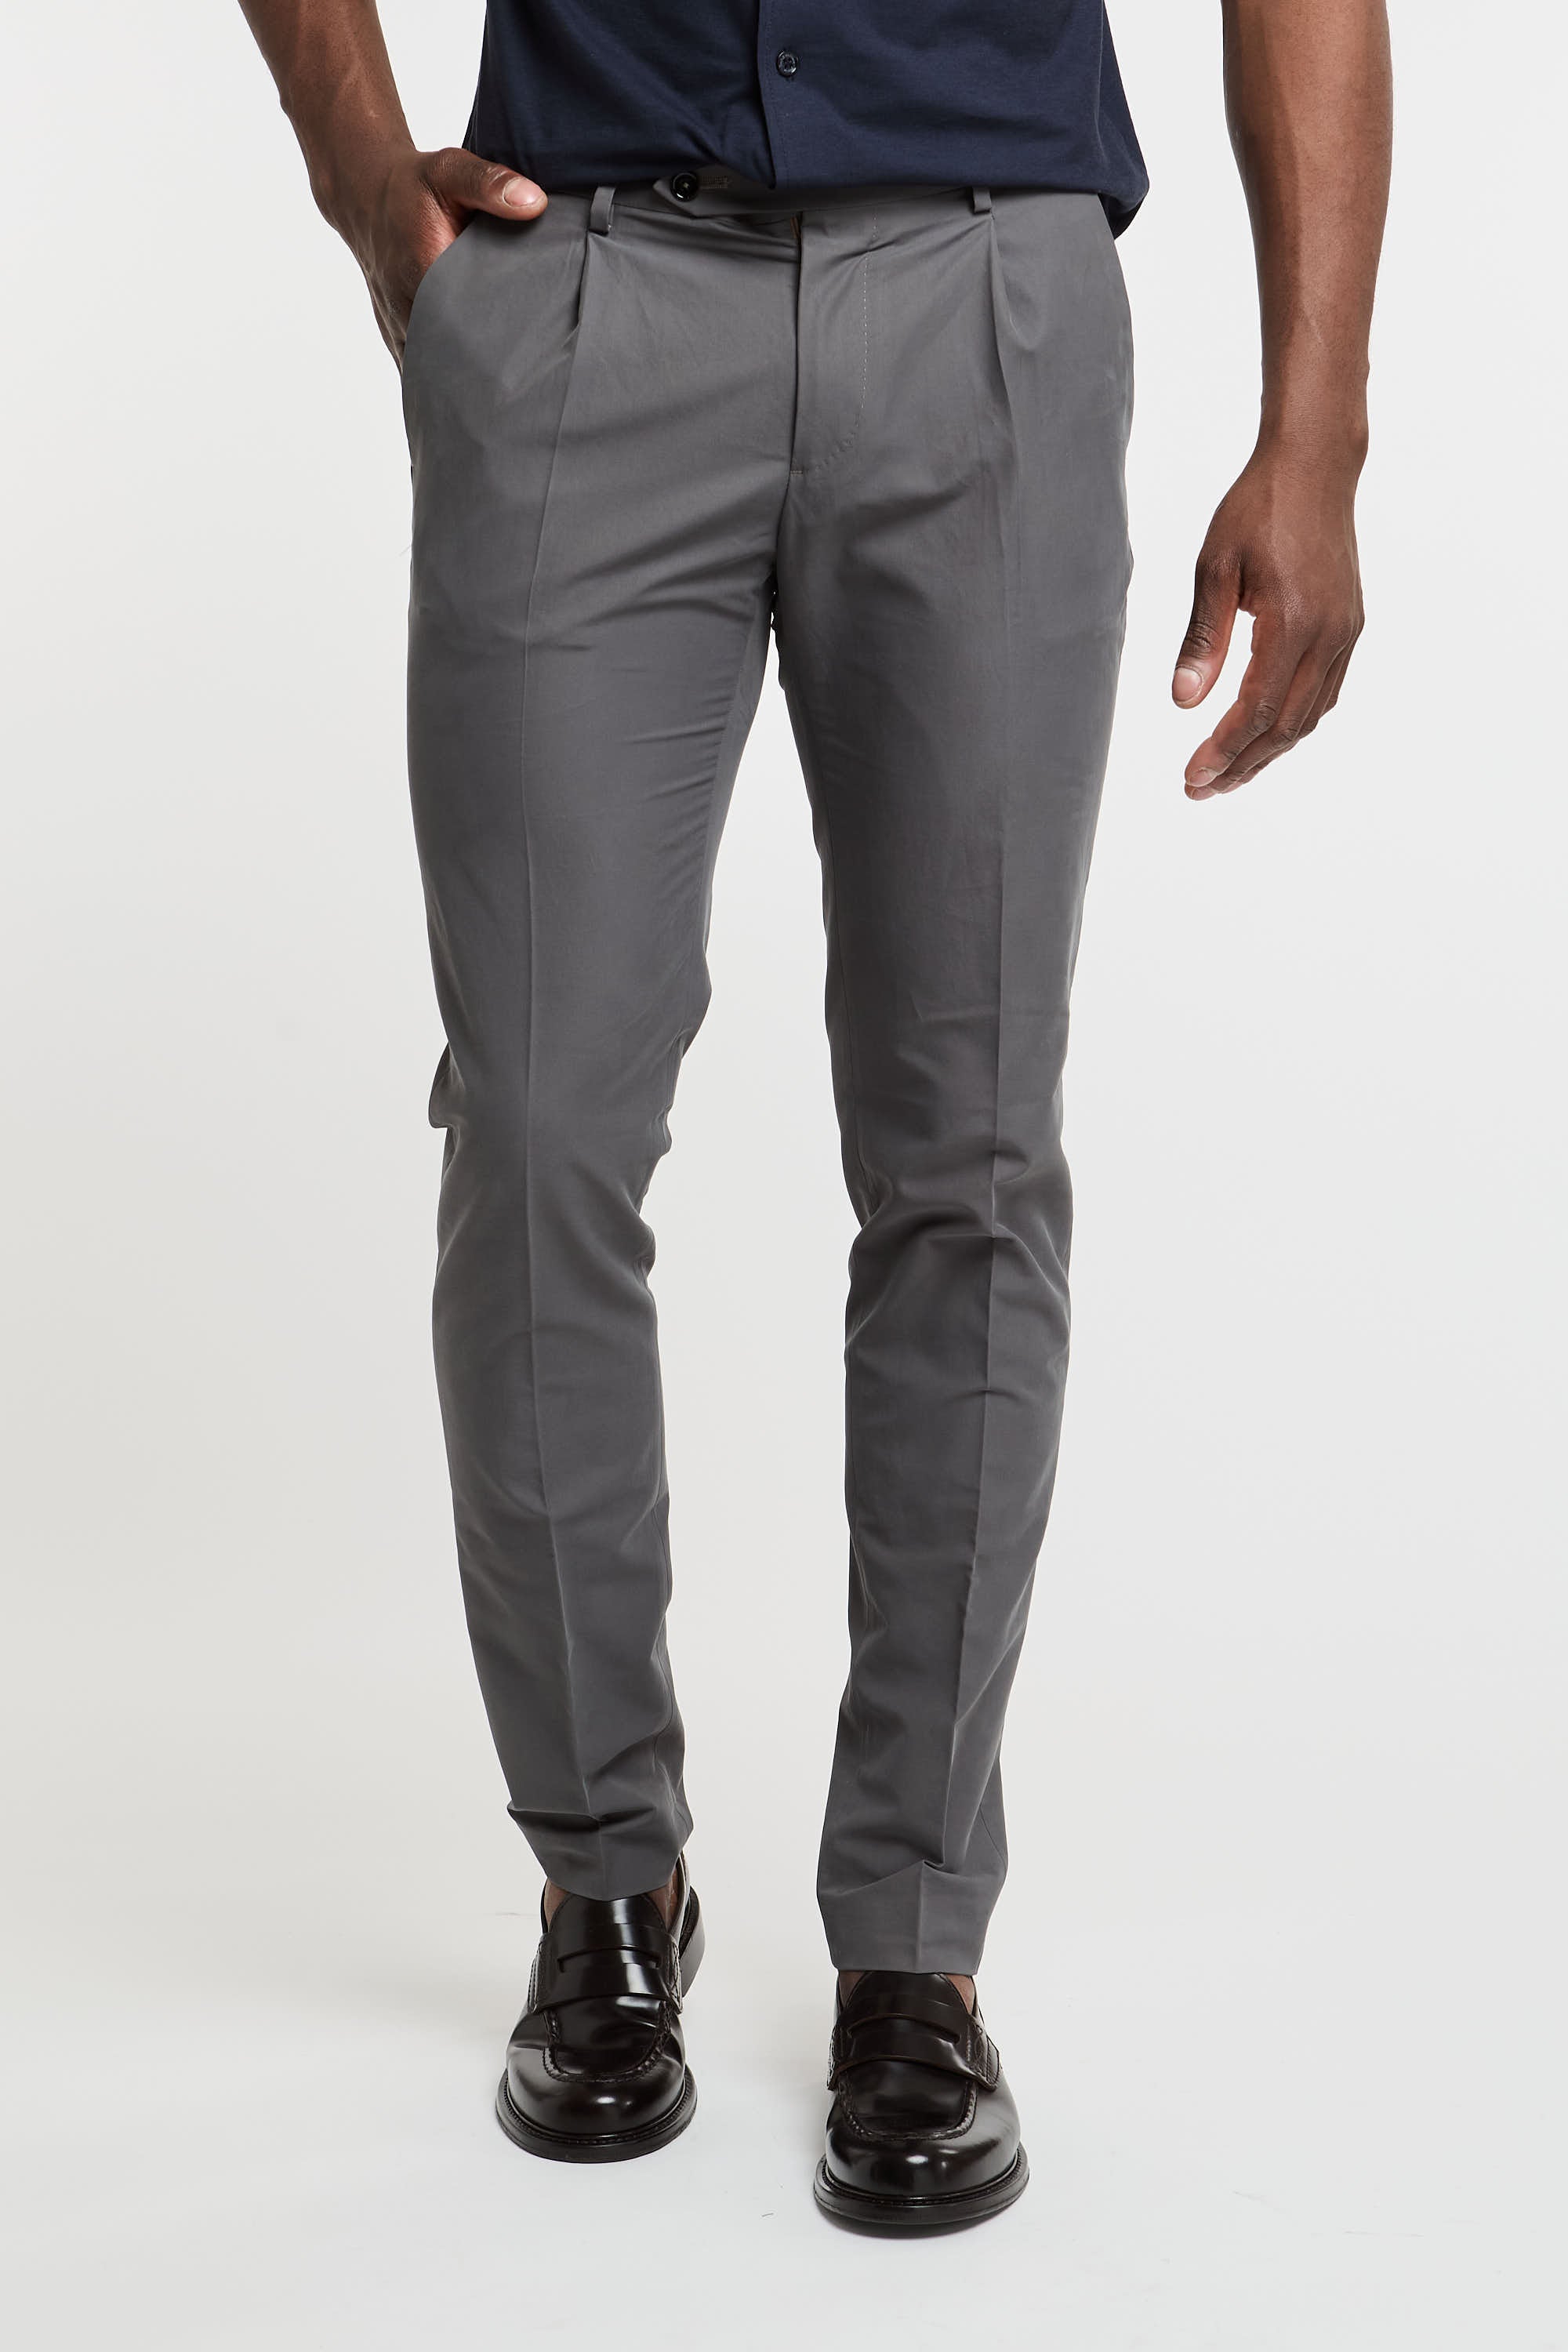 Berwich Trousers with Pleats Cotton/Polyamide Grey-4